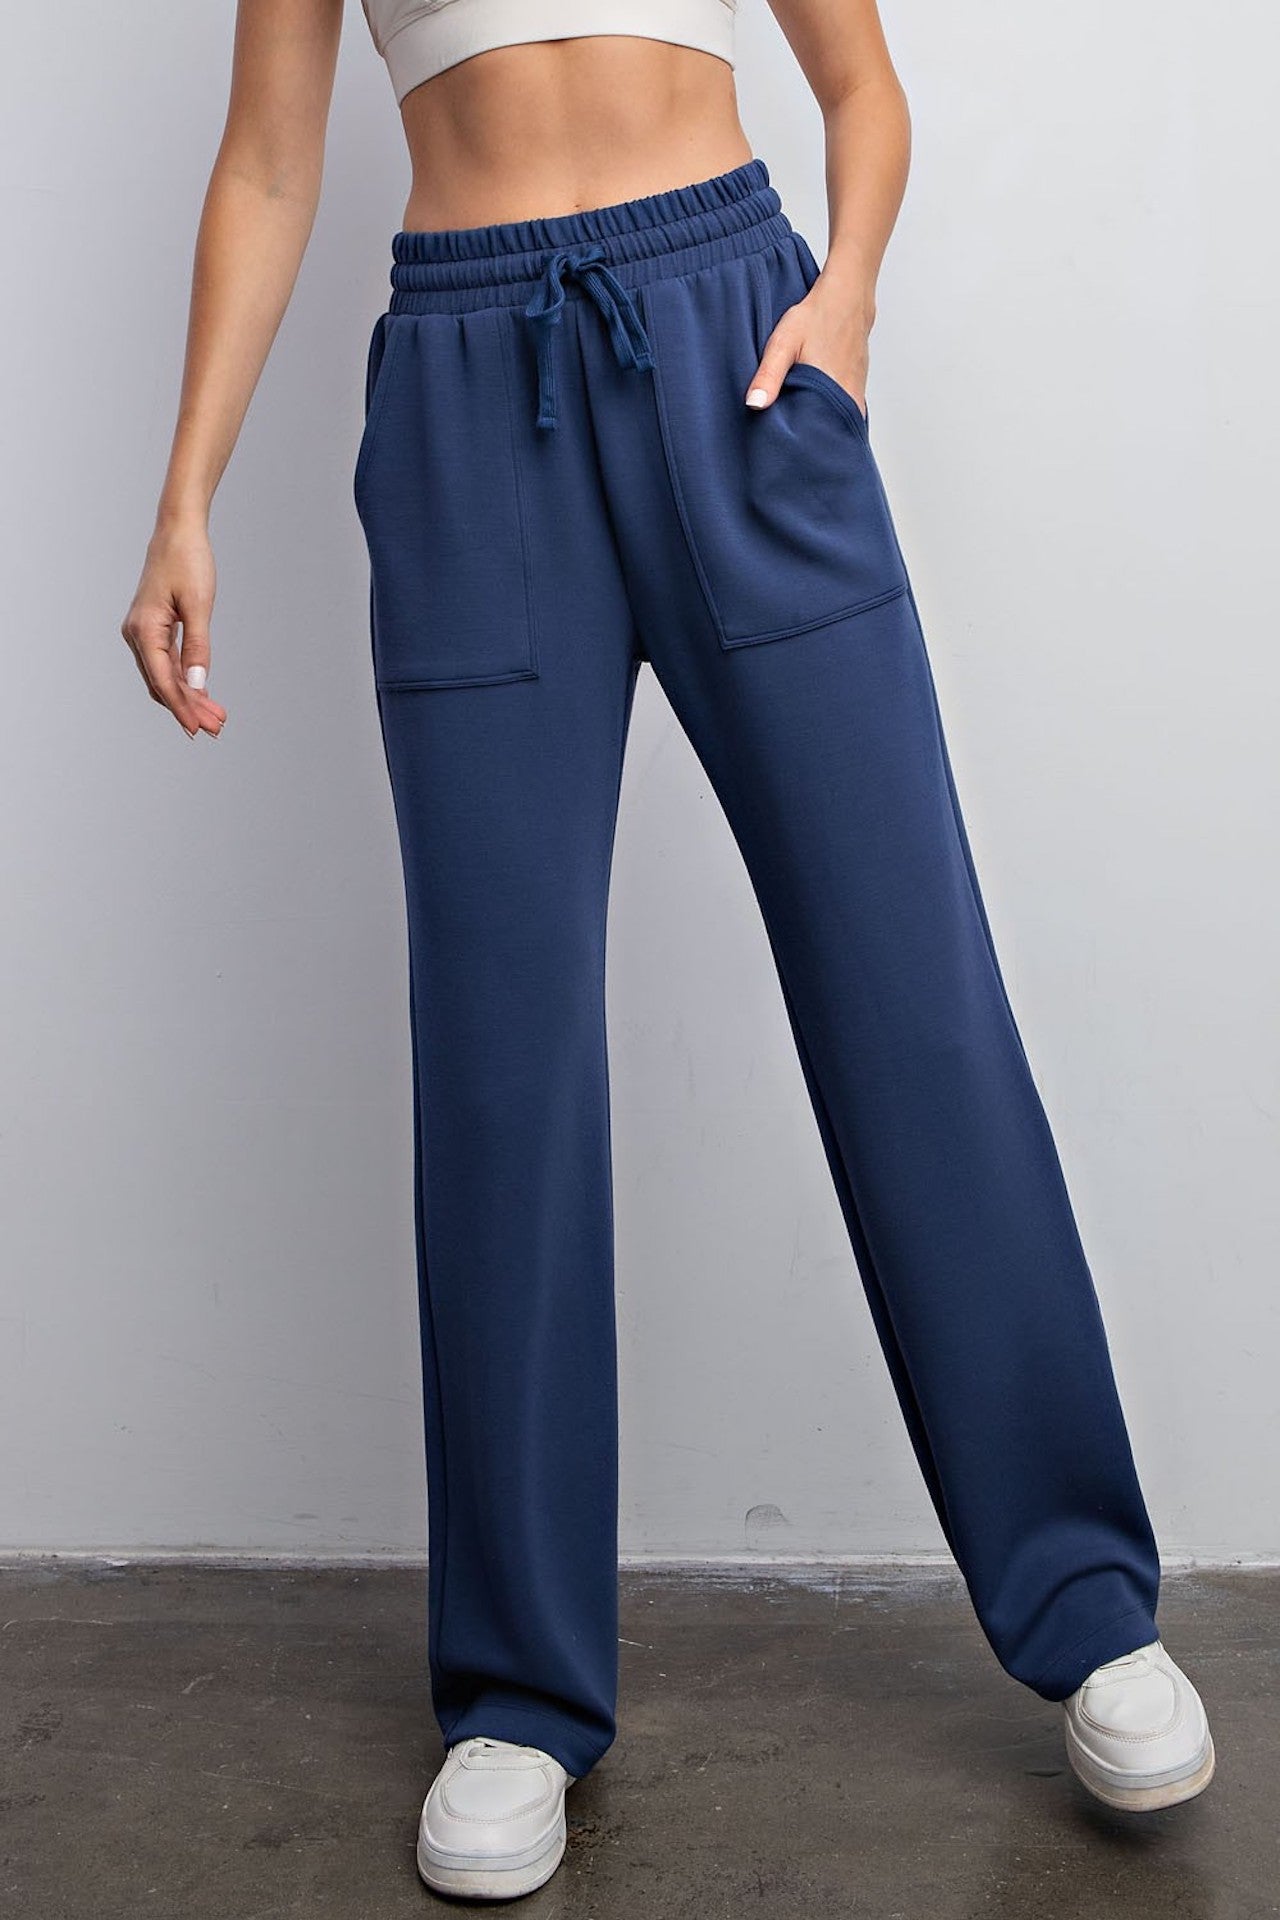 blue modal poly span sweatpants with pockets and an elastic waistband